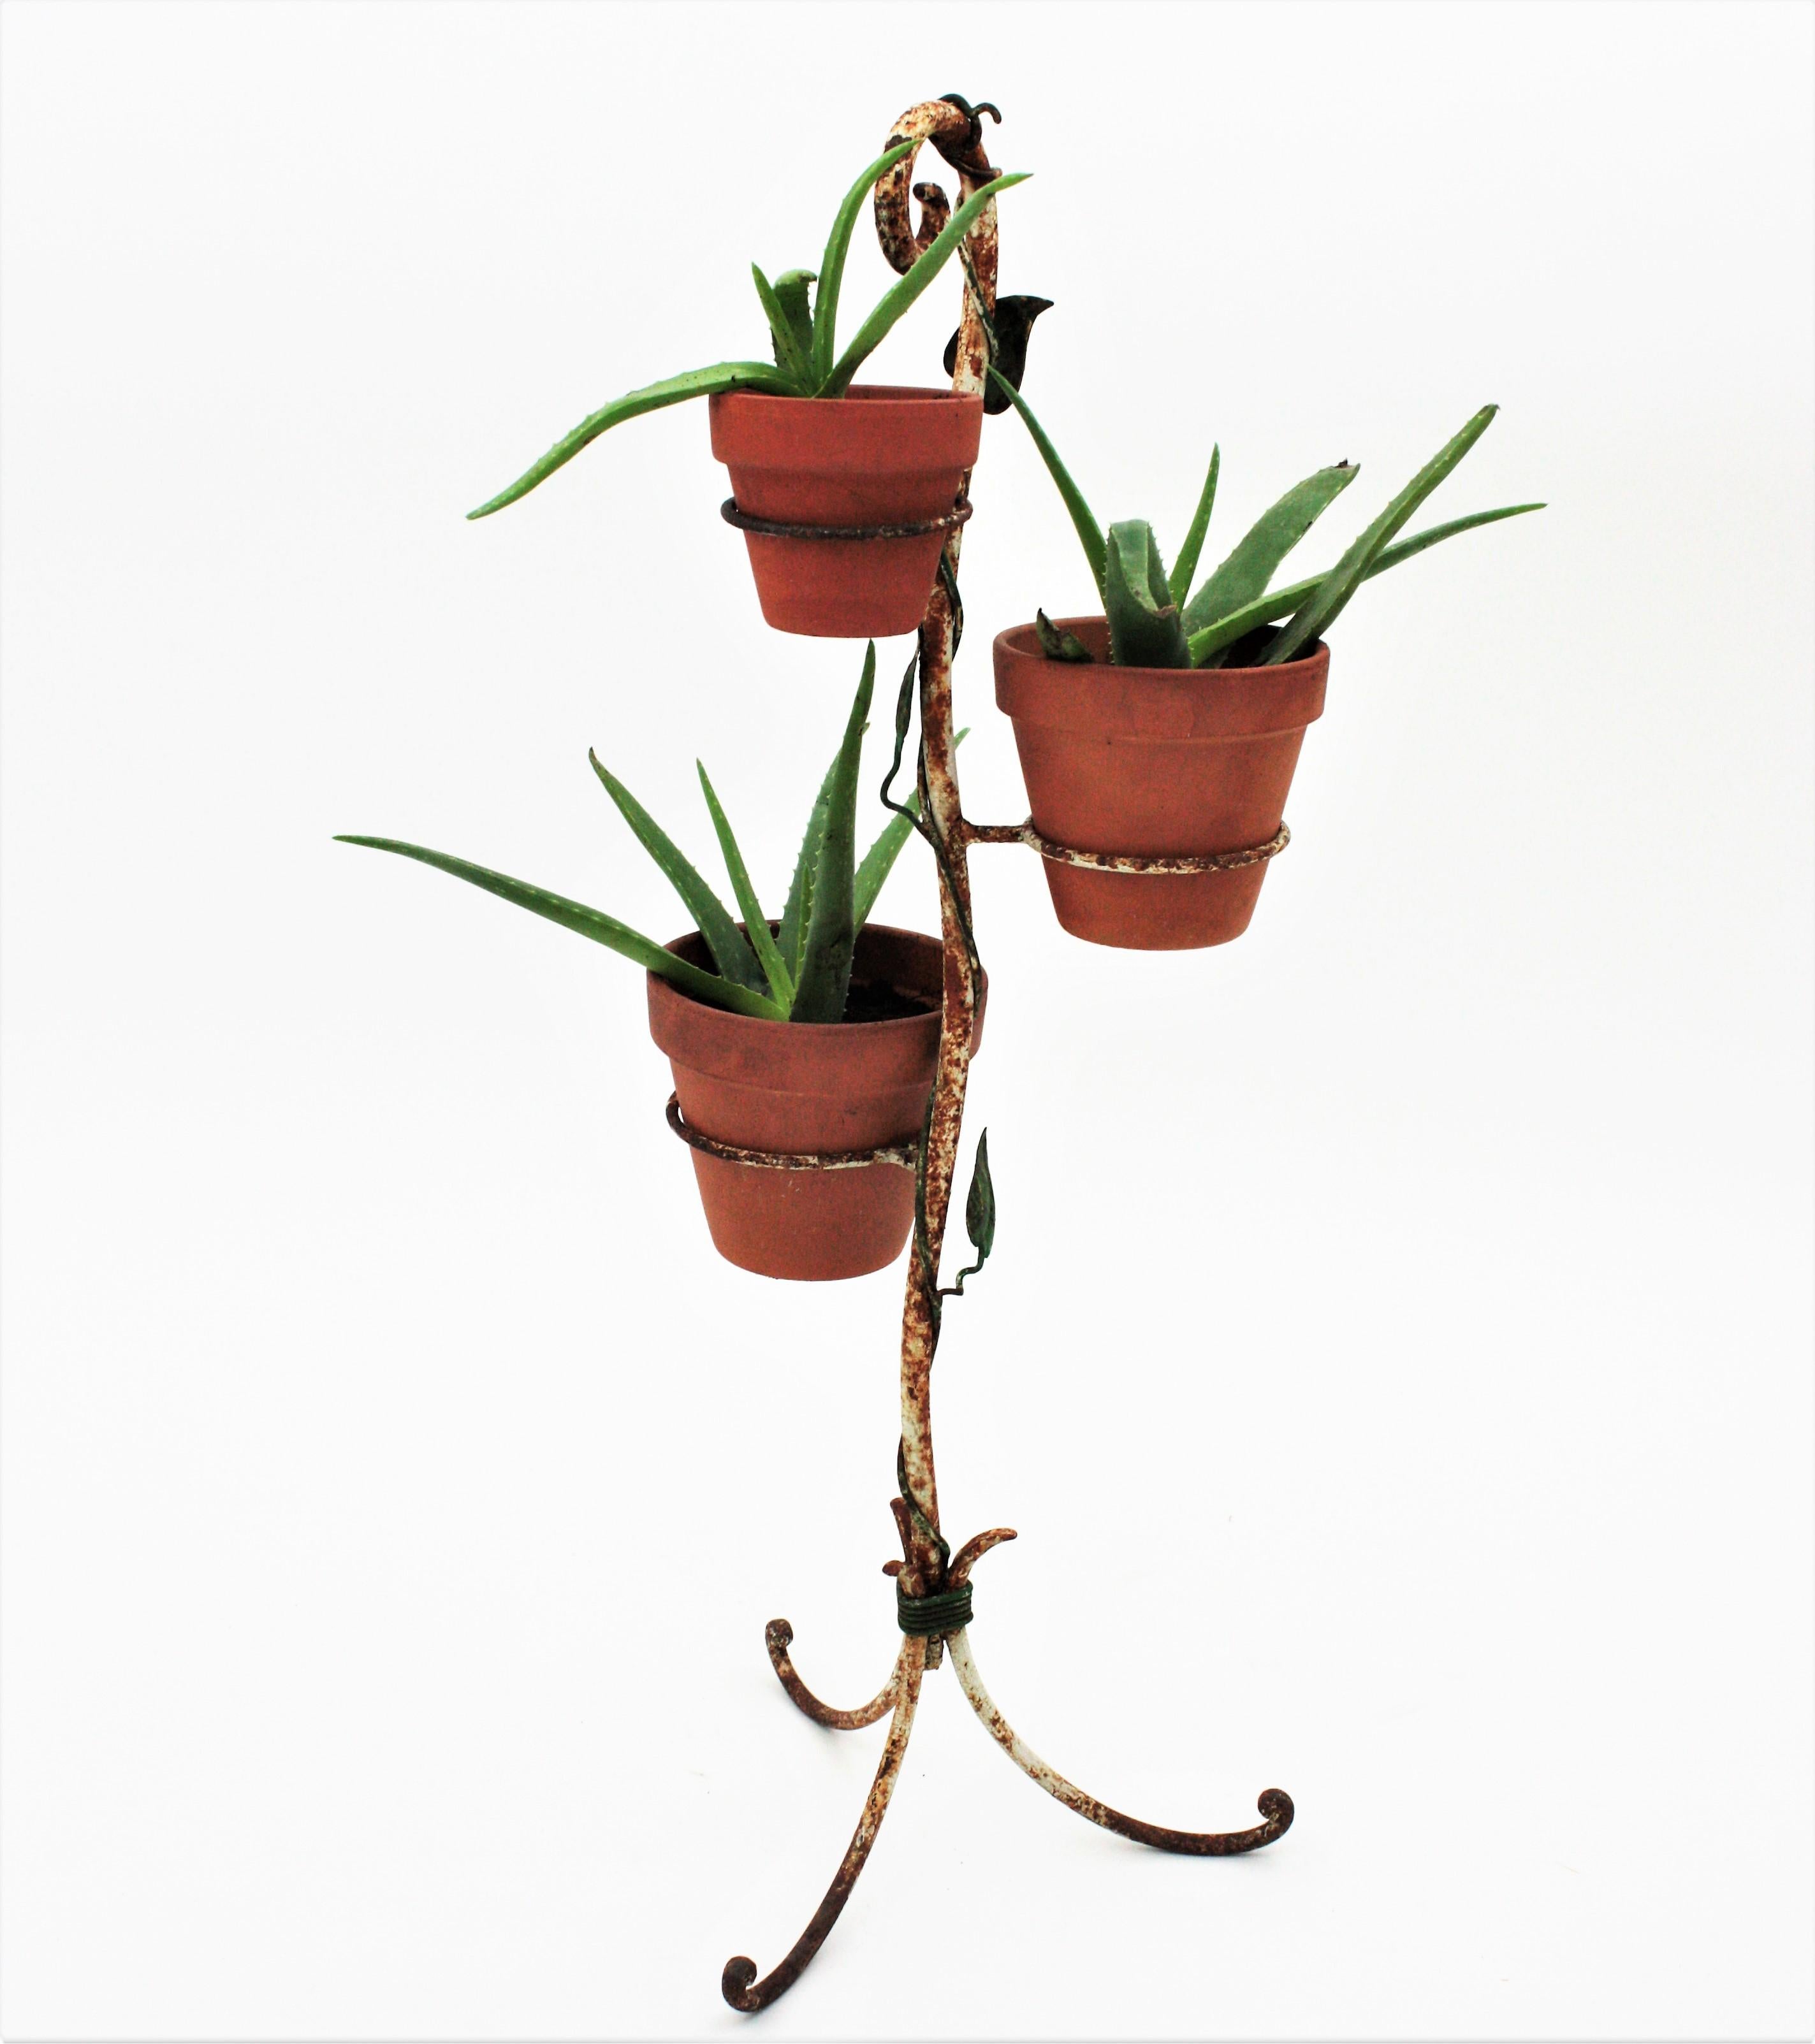 Eye-catching handcrafted iron plant stand / jardinière for three pots with foliage accents. France, 1920-1930s.
This beautiful plant rack has a design full of movement. It stands up on a tripod base and holds three rings in different sizes to place